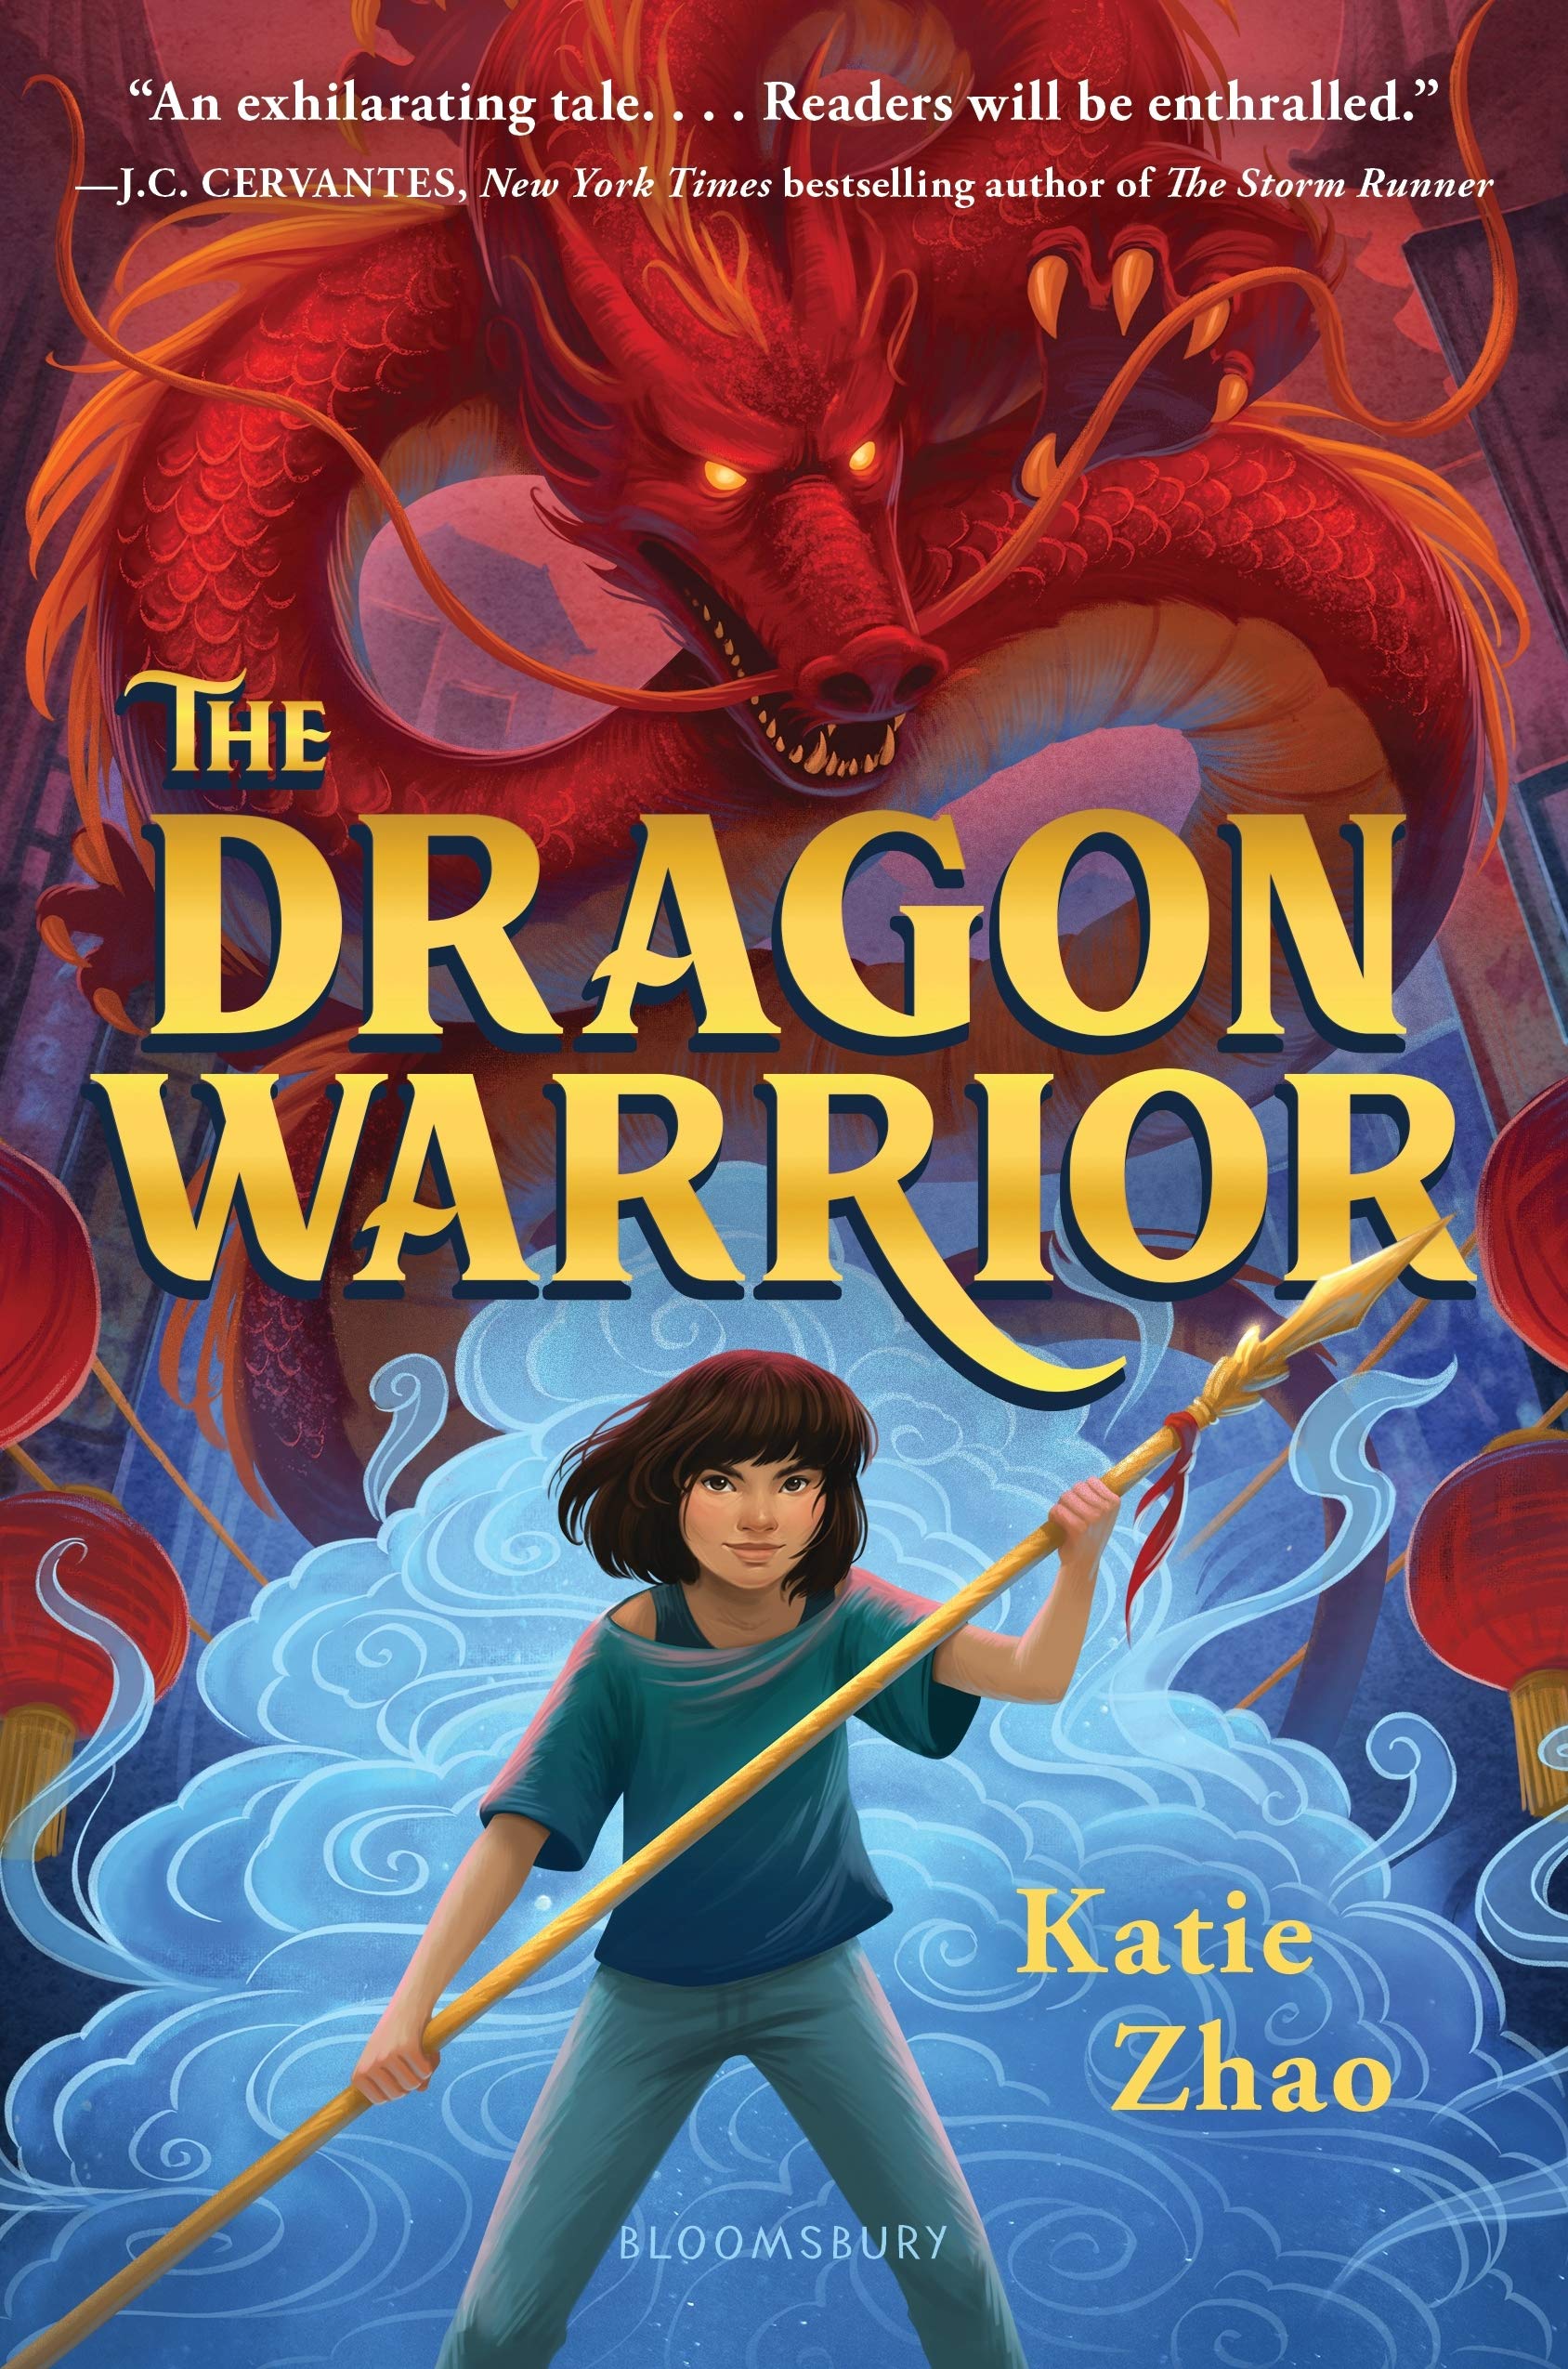 Book Review: ‘The Dragon Warrior” (The Dragon Warrior #1) by Katie Zhao